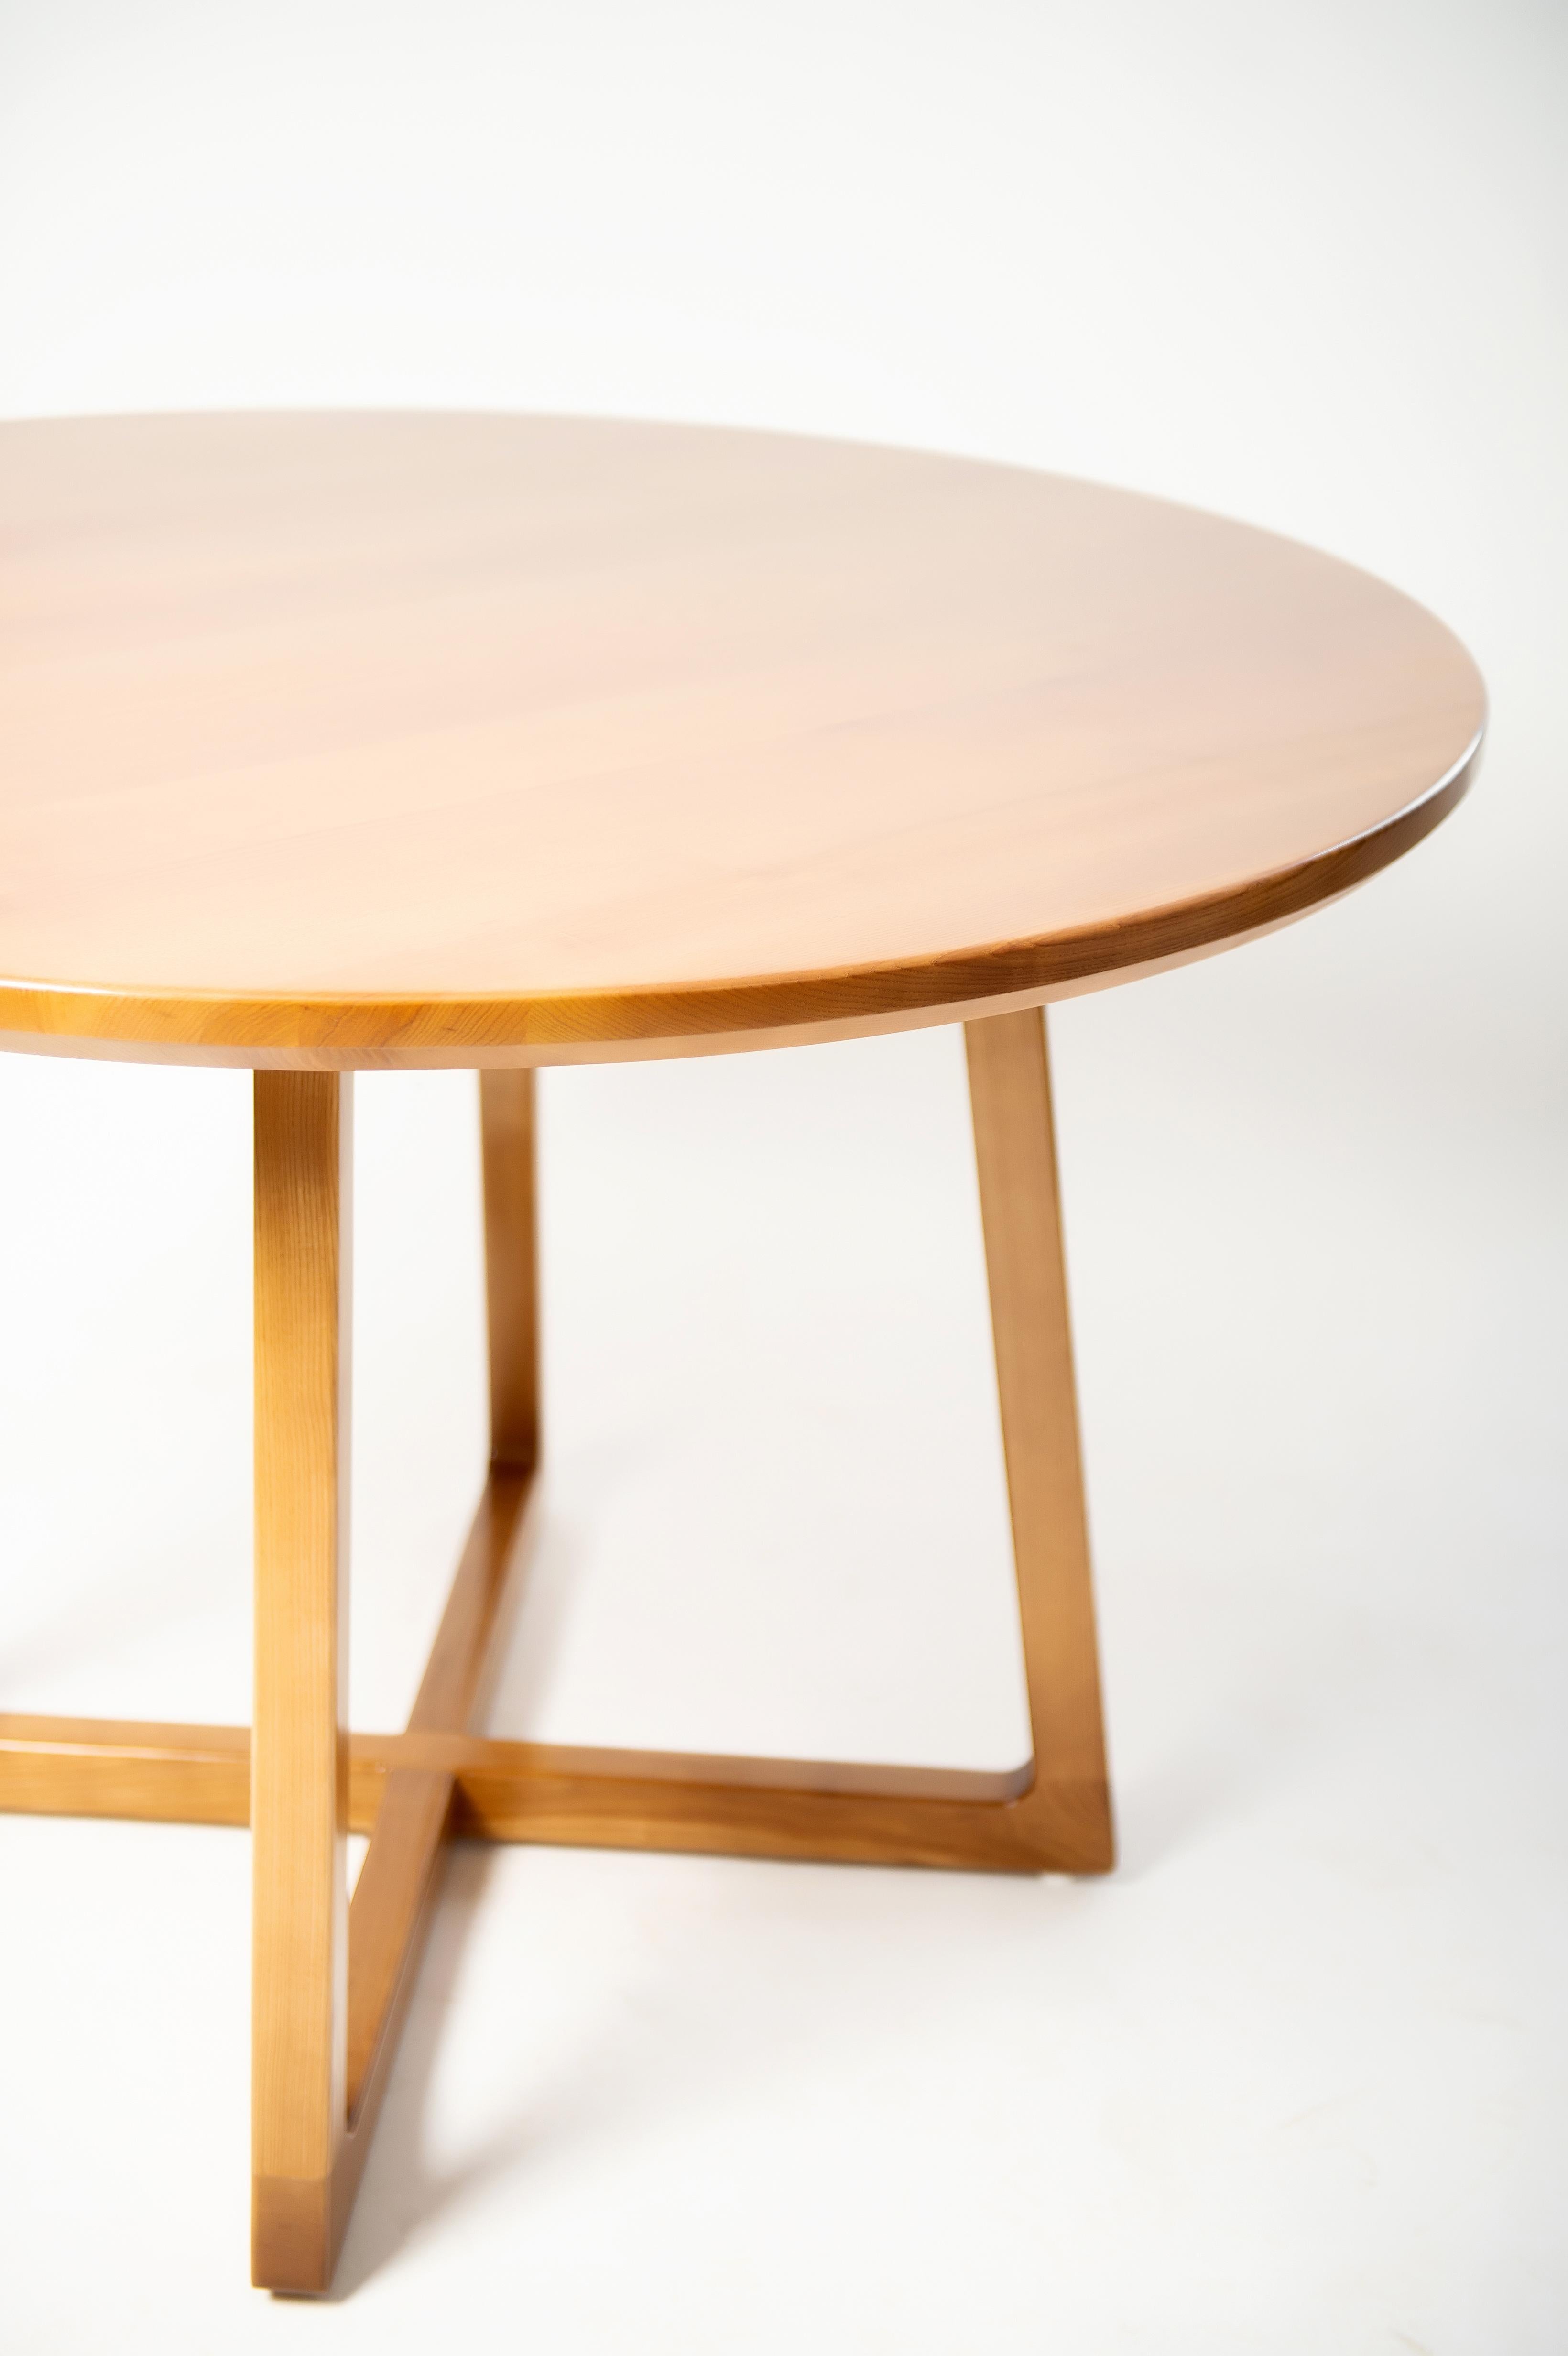 The Ellis table is pulled straight out of the 60s and we love it. The style that may remind you of Mad Men or Marvelous Mrs. Maisel is perfect for the kitchen but can also fit great into a basement that accompanies a bar. Whether it’s for cards or